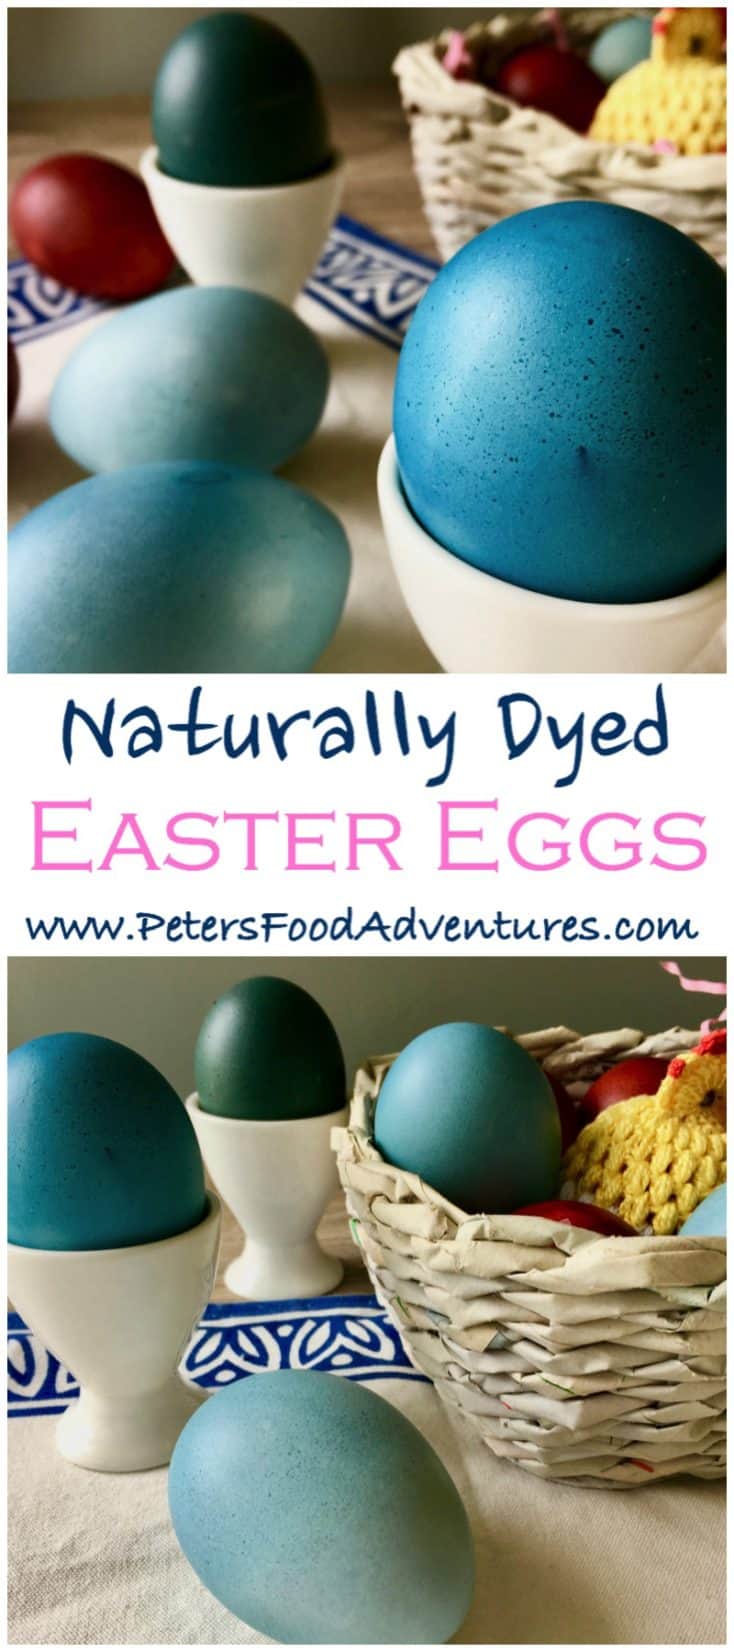 Naturally dyed easter eggs pinterest pin